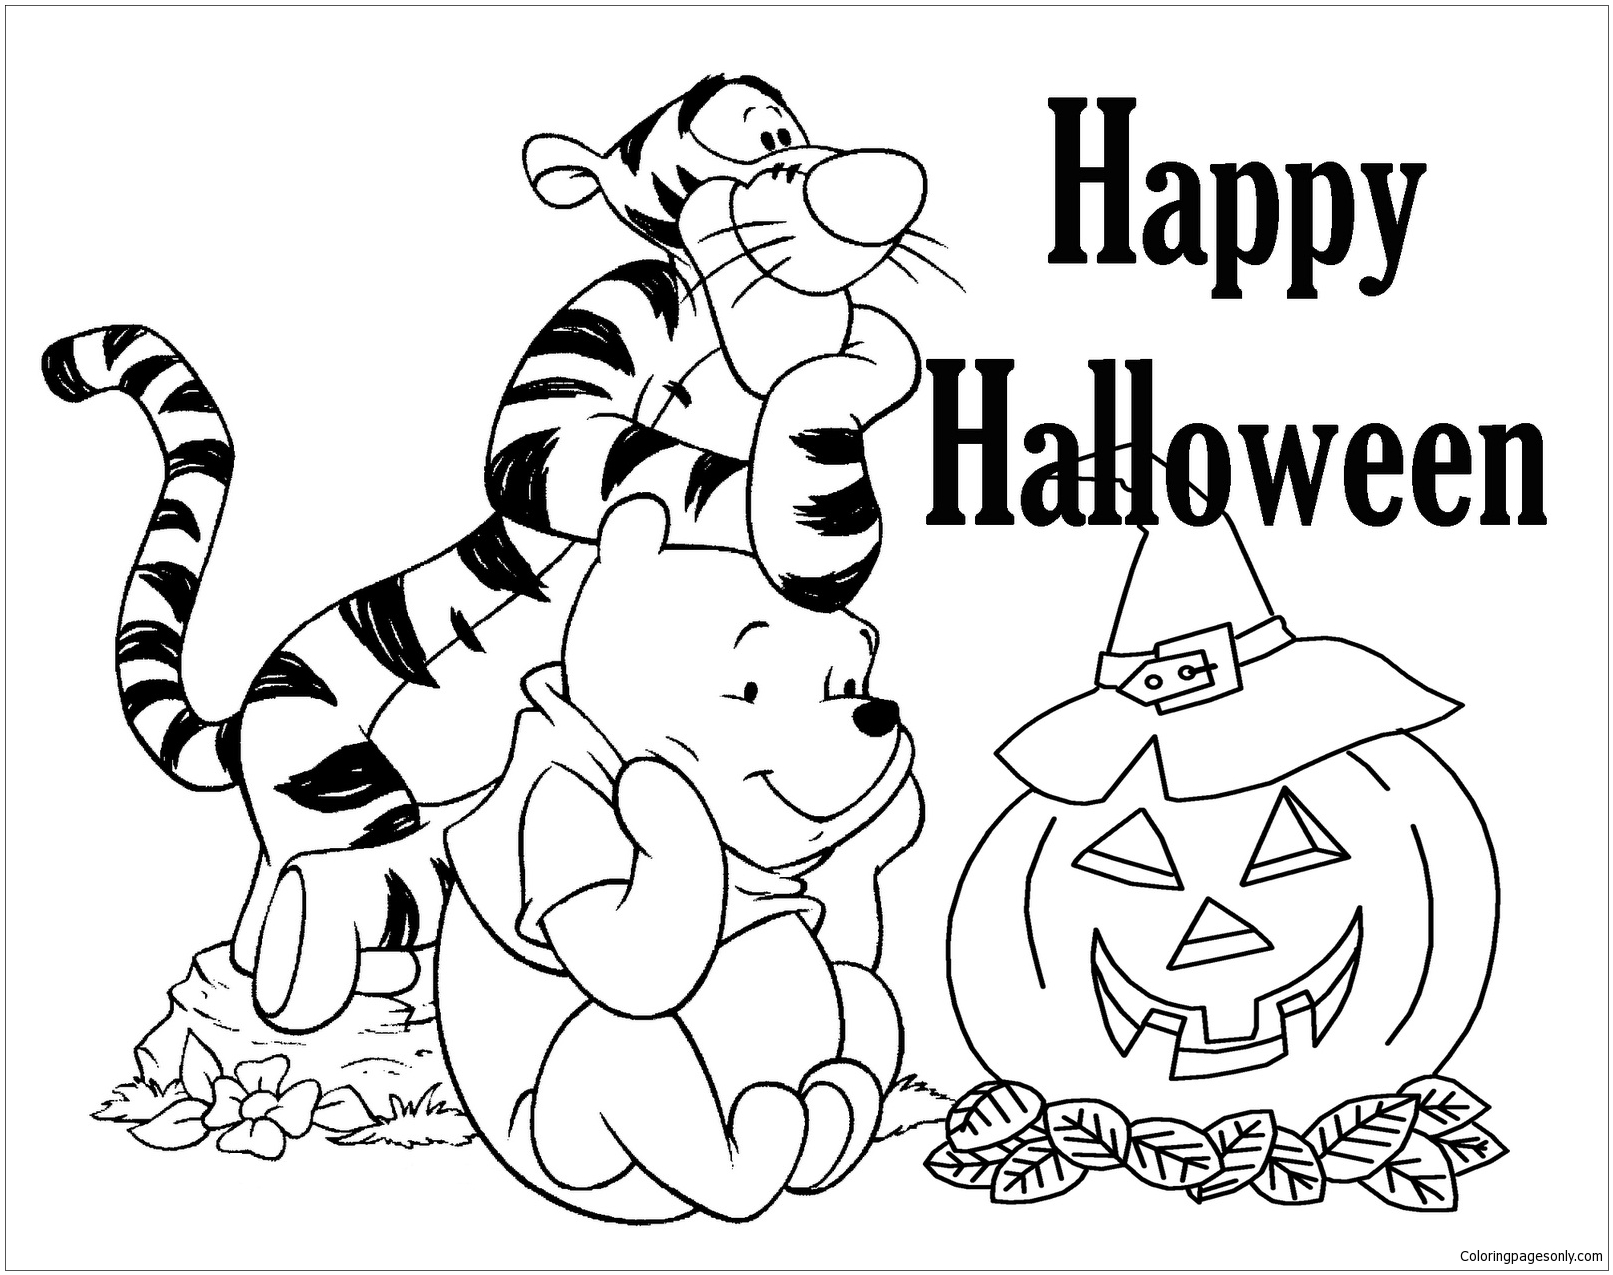 Happy Halloween 5 Coloring Page